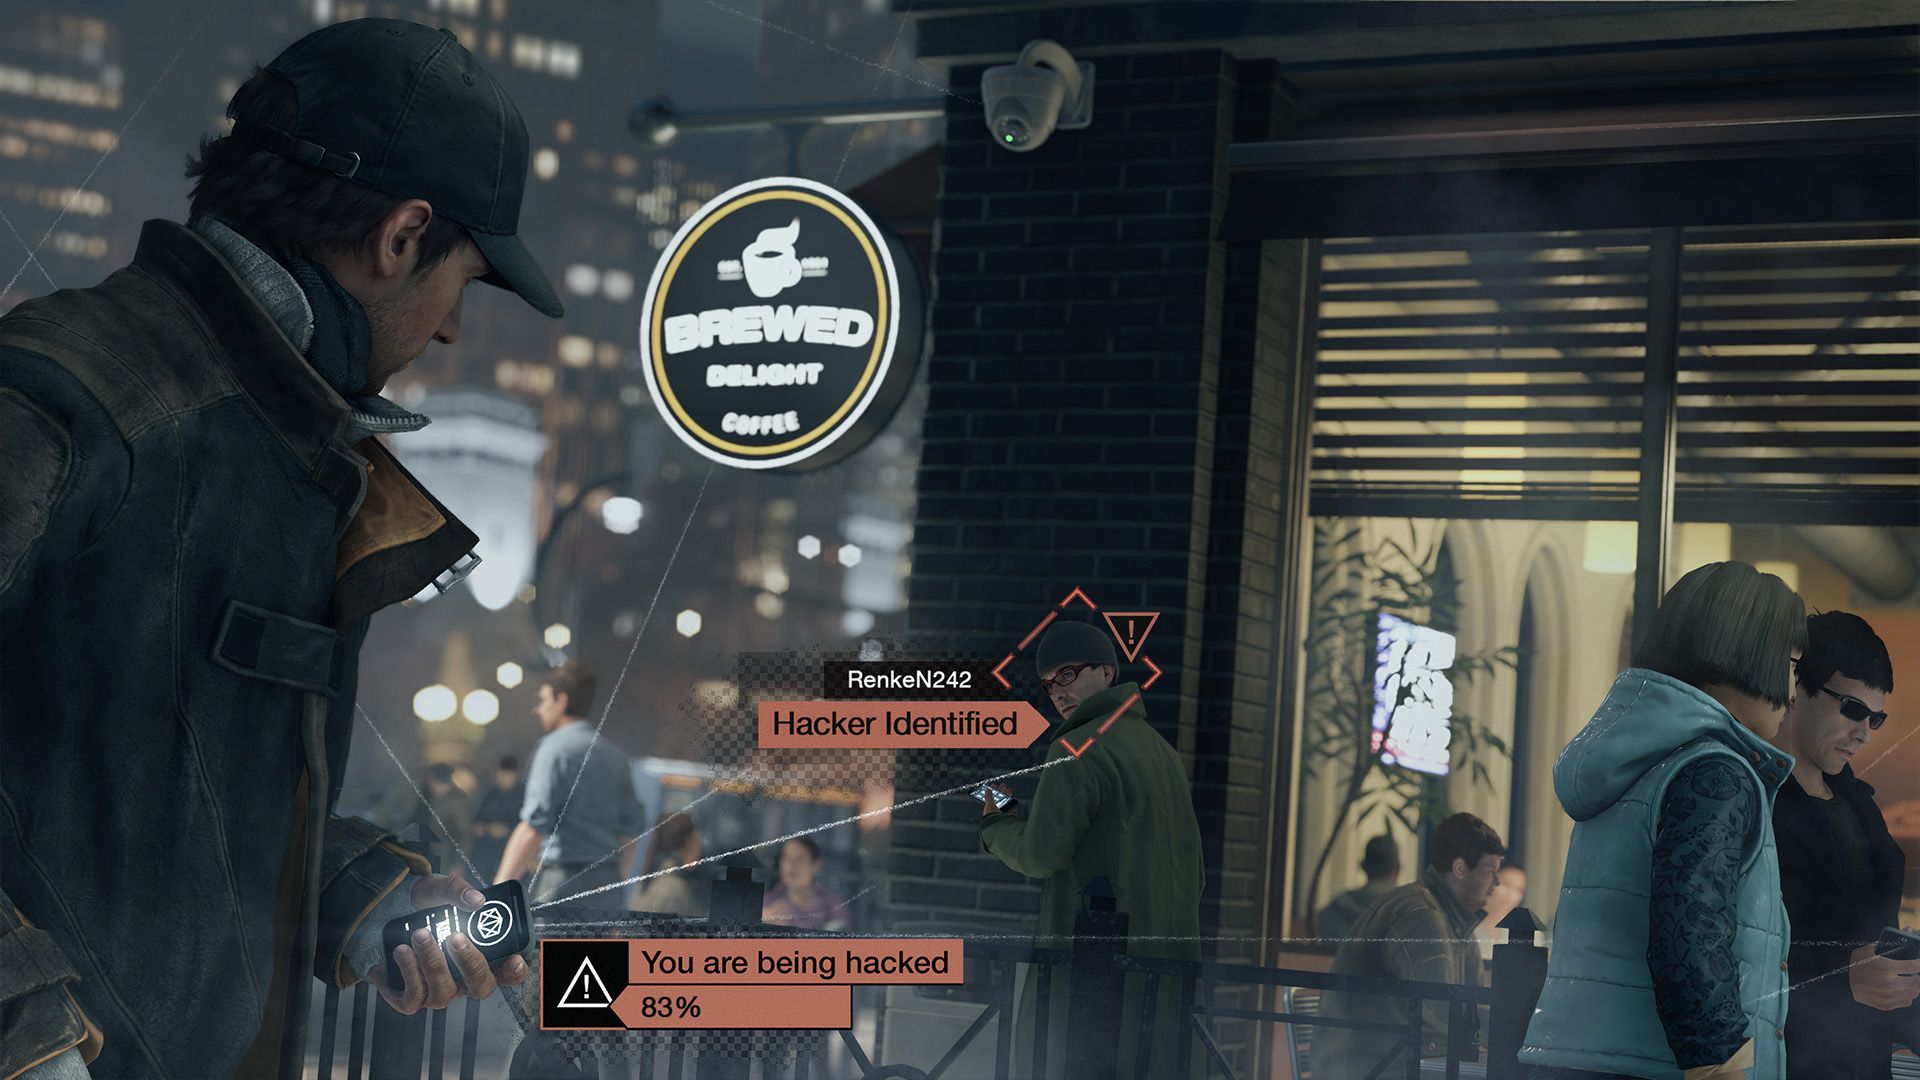 interview watch dogs creative director talks next gen the future of gaming apps and more image 5